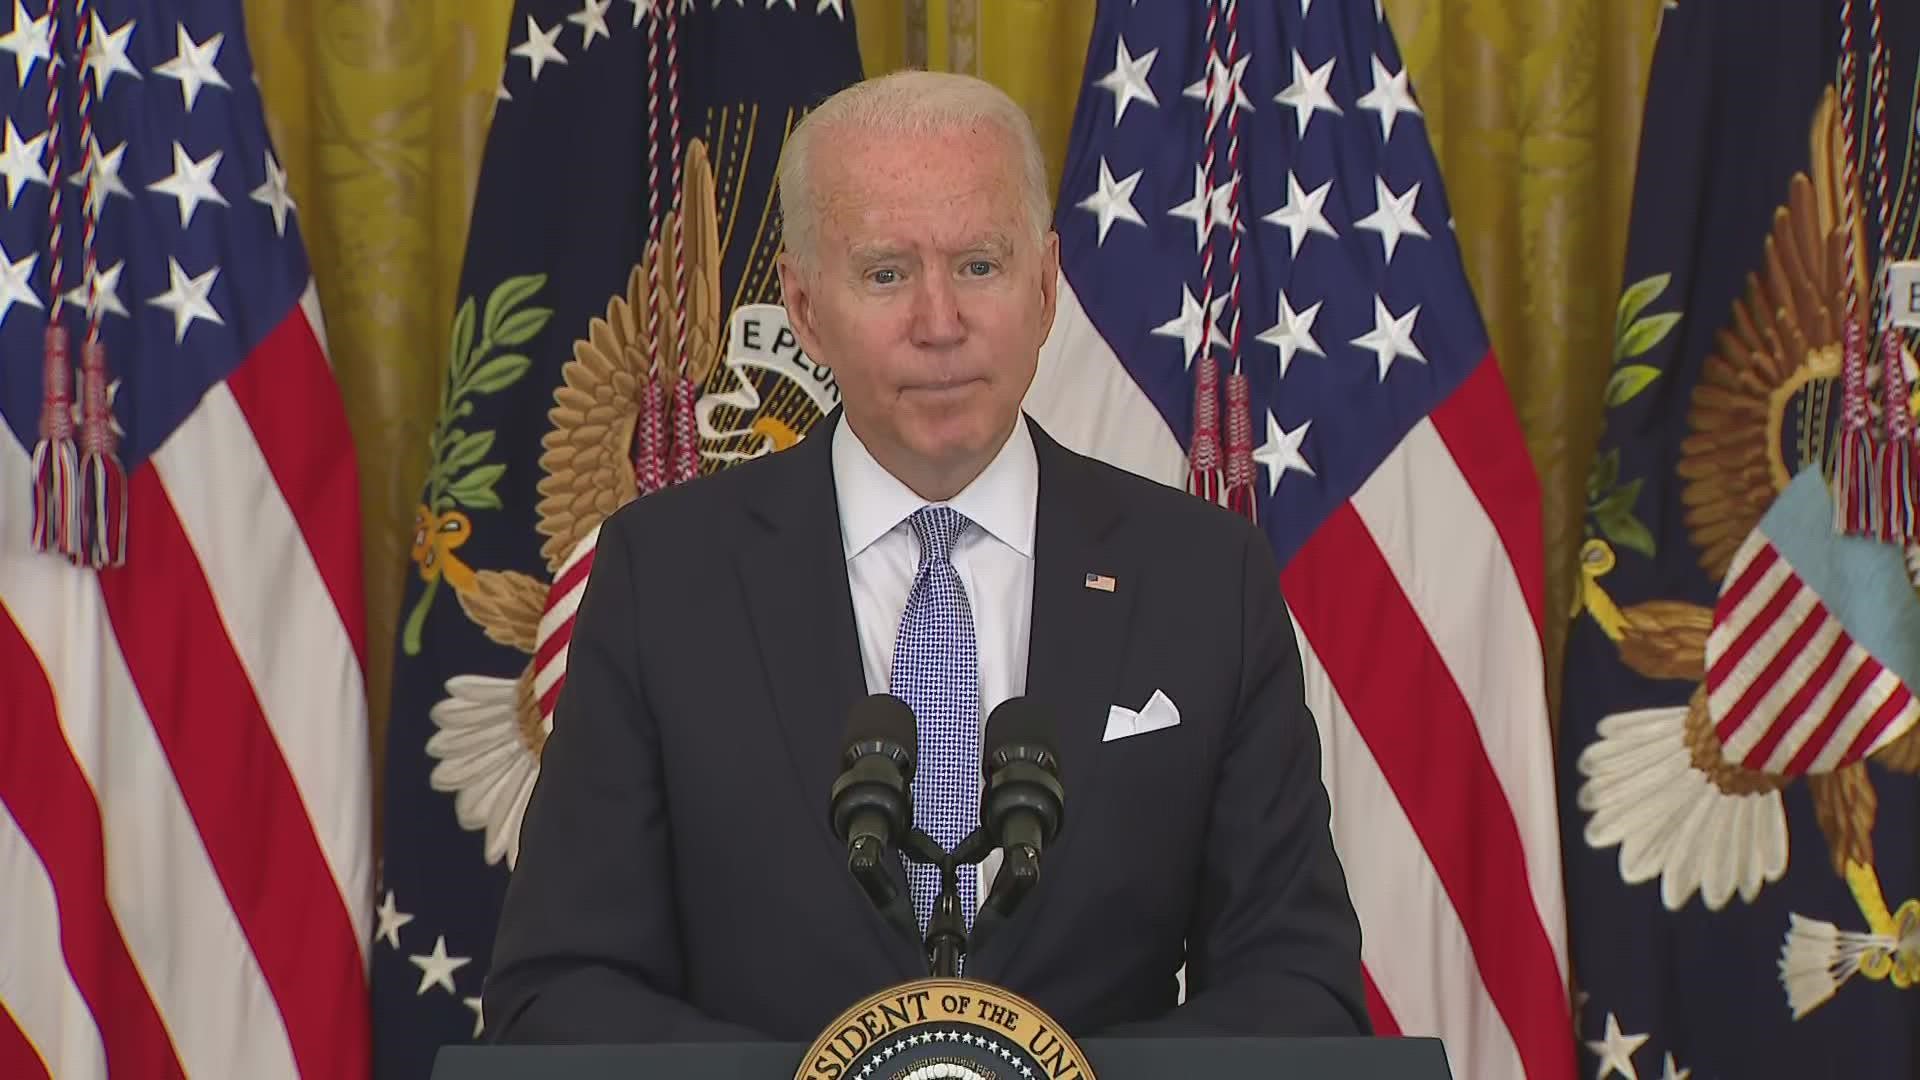 President Joe Biden spoke Thursday on what he's previously called "a pandemic of the unvaccinated."